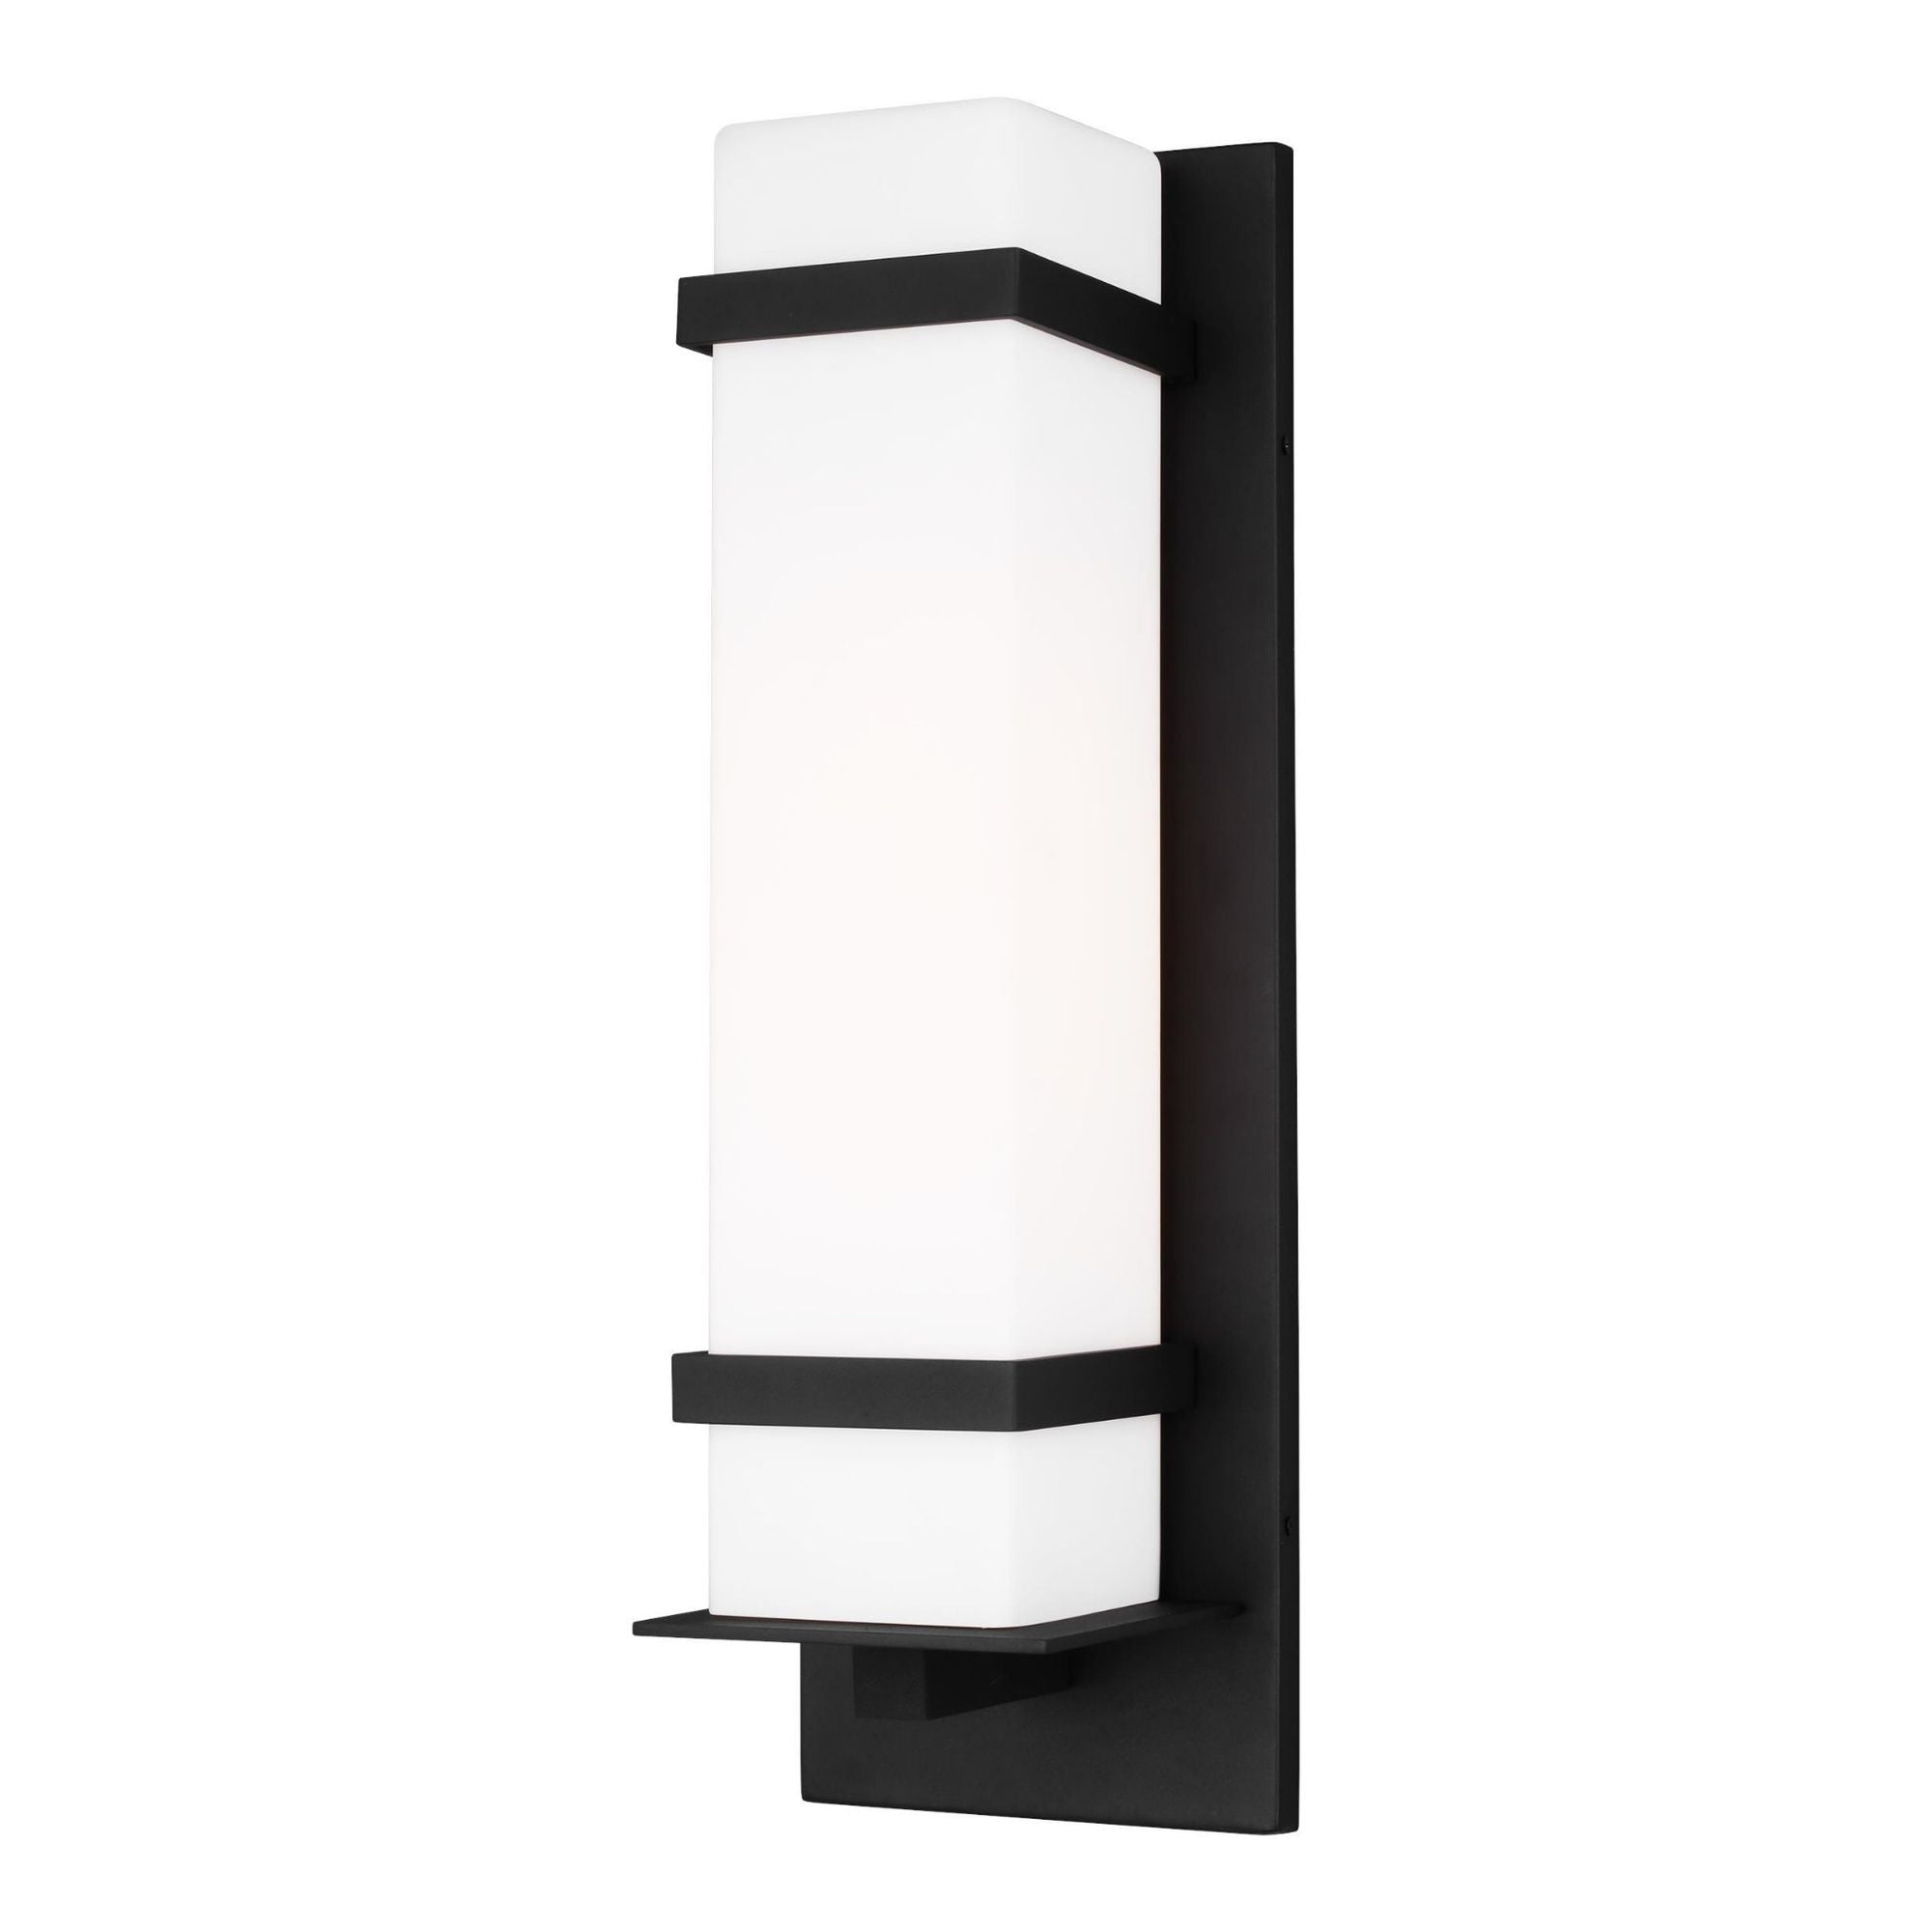 Alban Large One Light Outdoor Wall Lantern Modern Fixture 8" Width 24.625" Height Aluminum Square Etched Opal Shade in Black